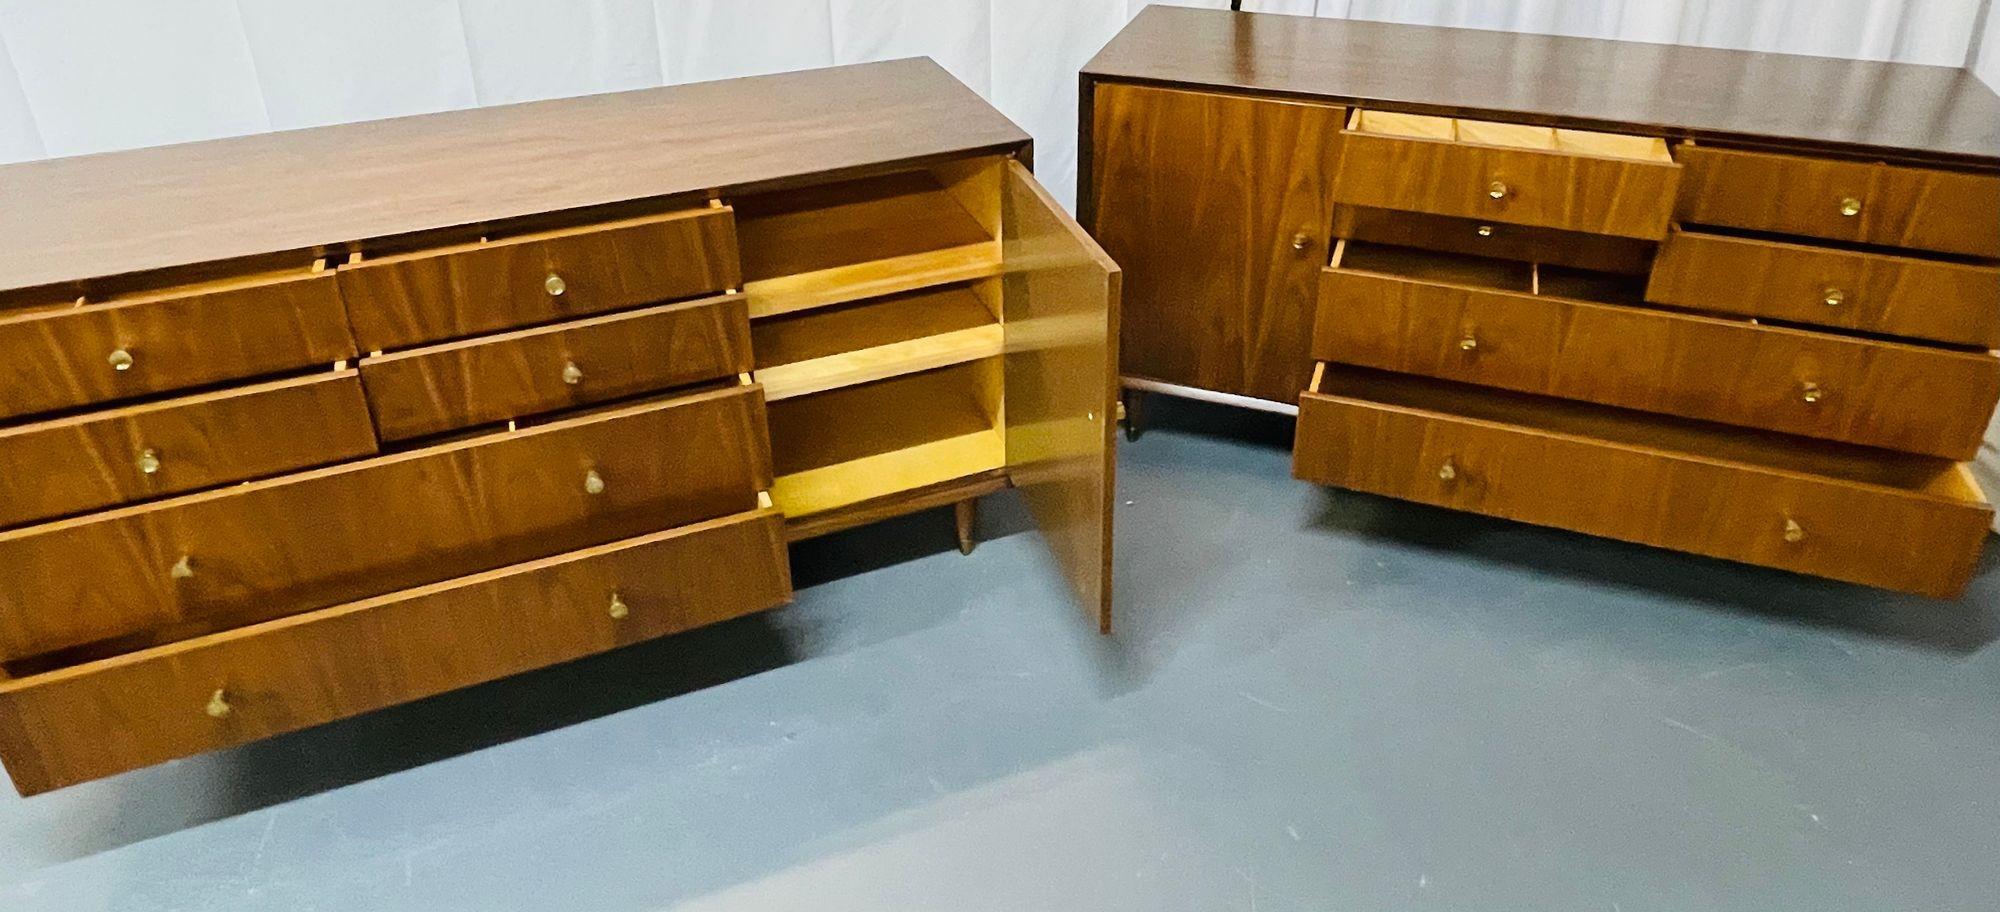 Pair of Mid-Century Modern Chests, Dressers Bedside Stands, Opposing, Refinished For Sale 3